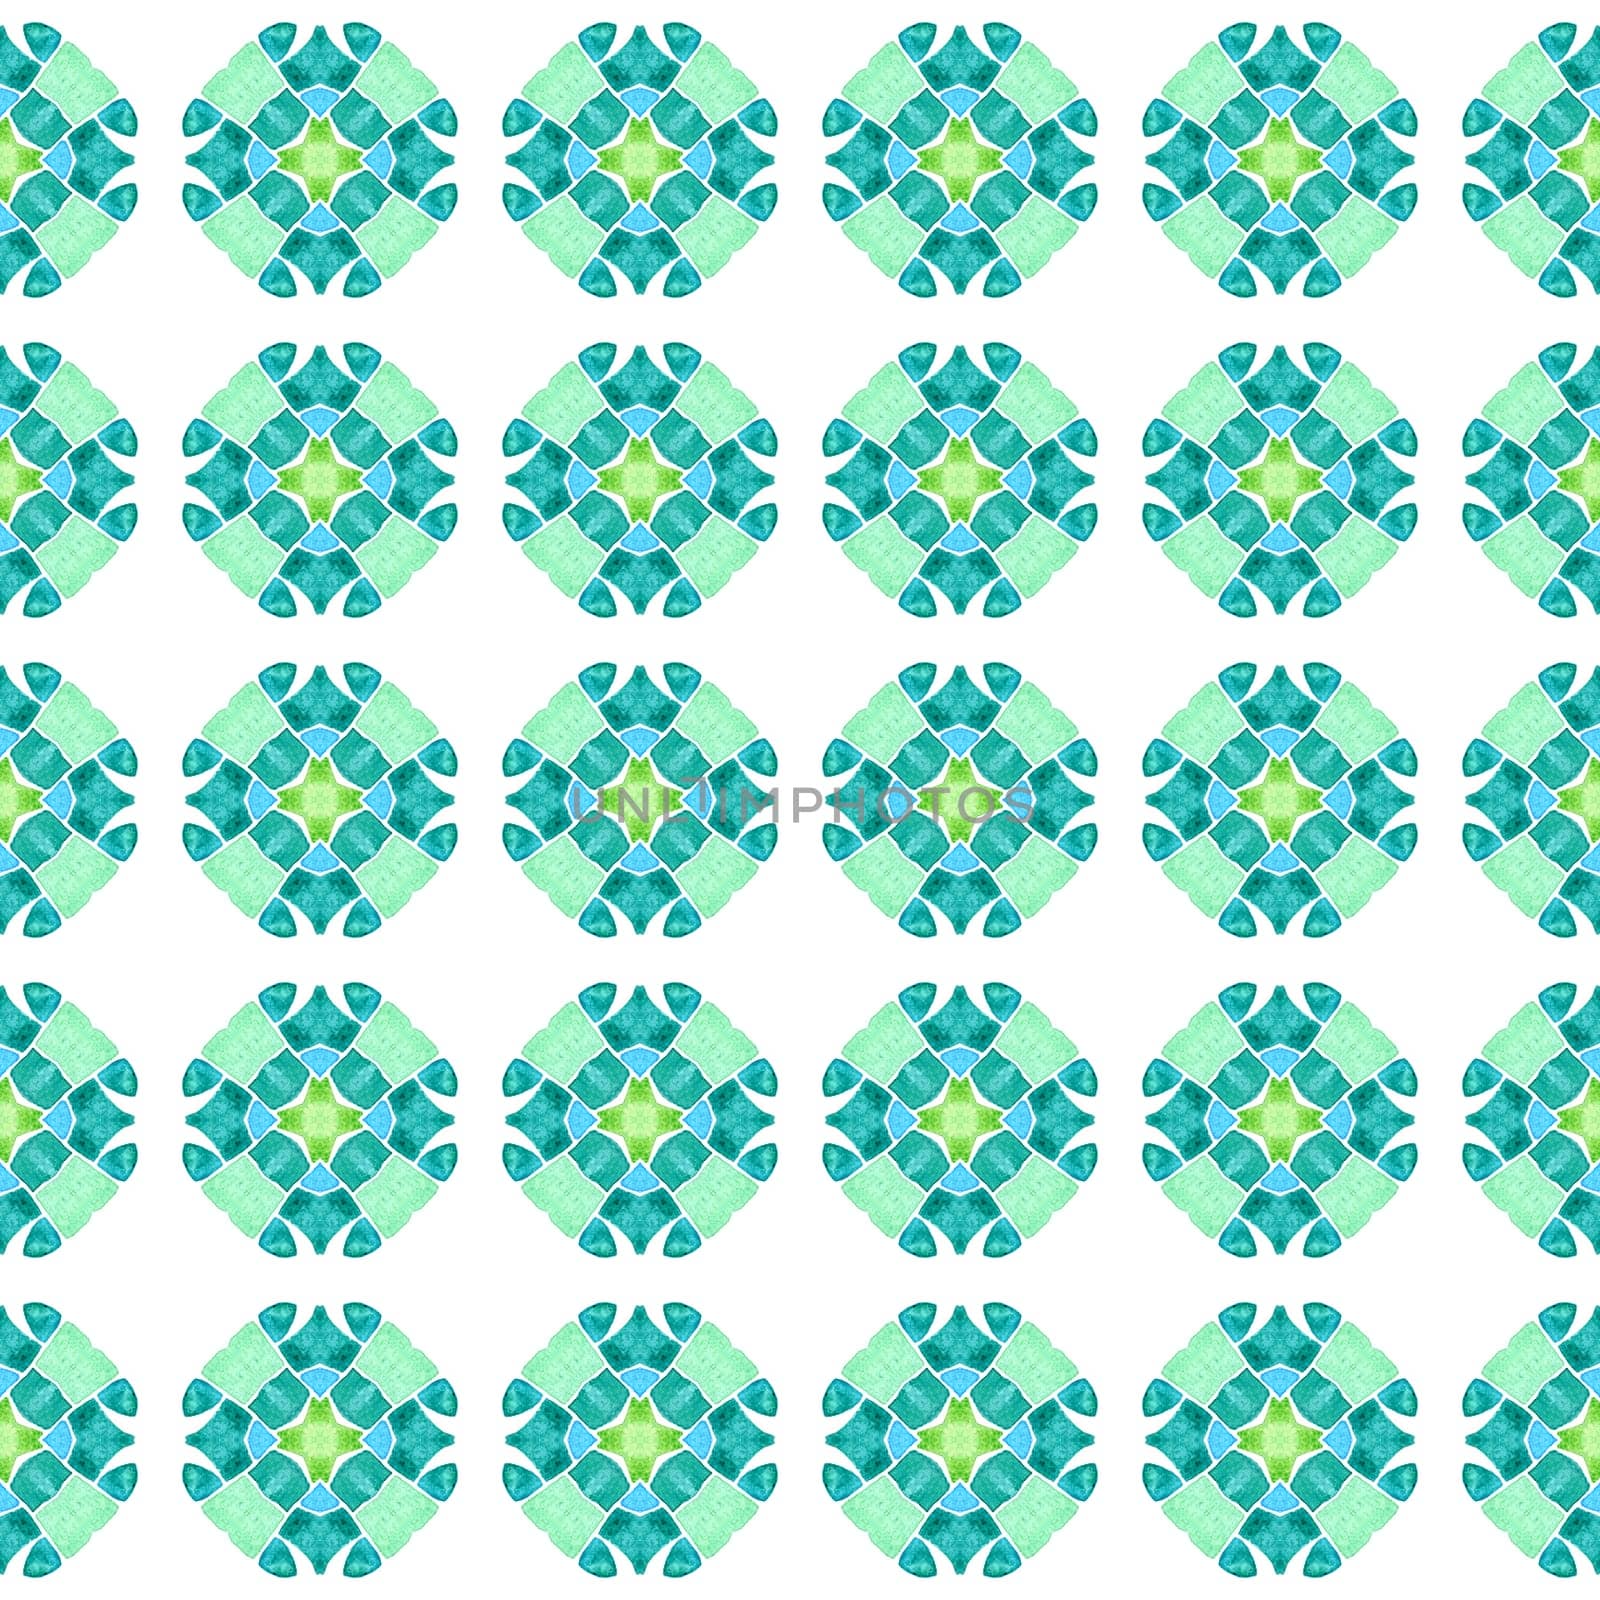 Watercolor summer ethnic border pattern. Green exquisite boho chic summer design. Textile ready modern print, swimwear fabric, wallpaper, wrapping. Ethnic hand painted pattern.